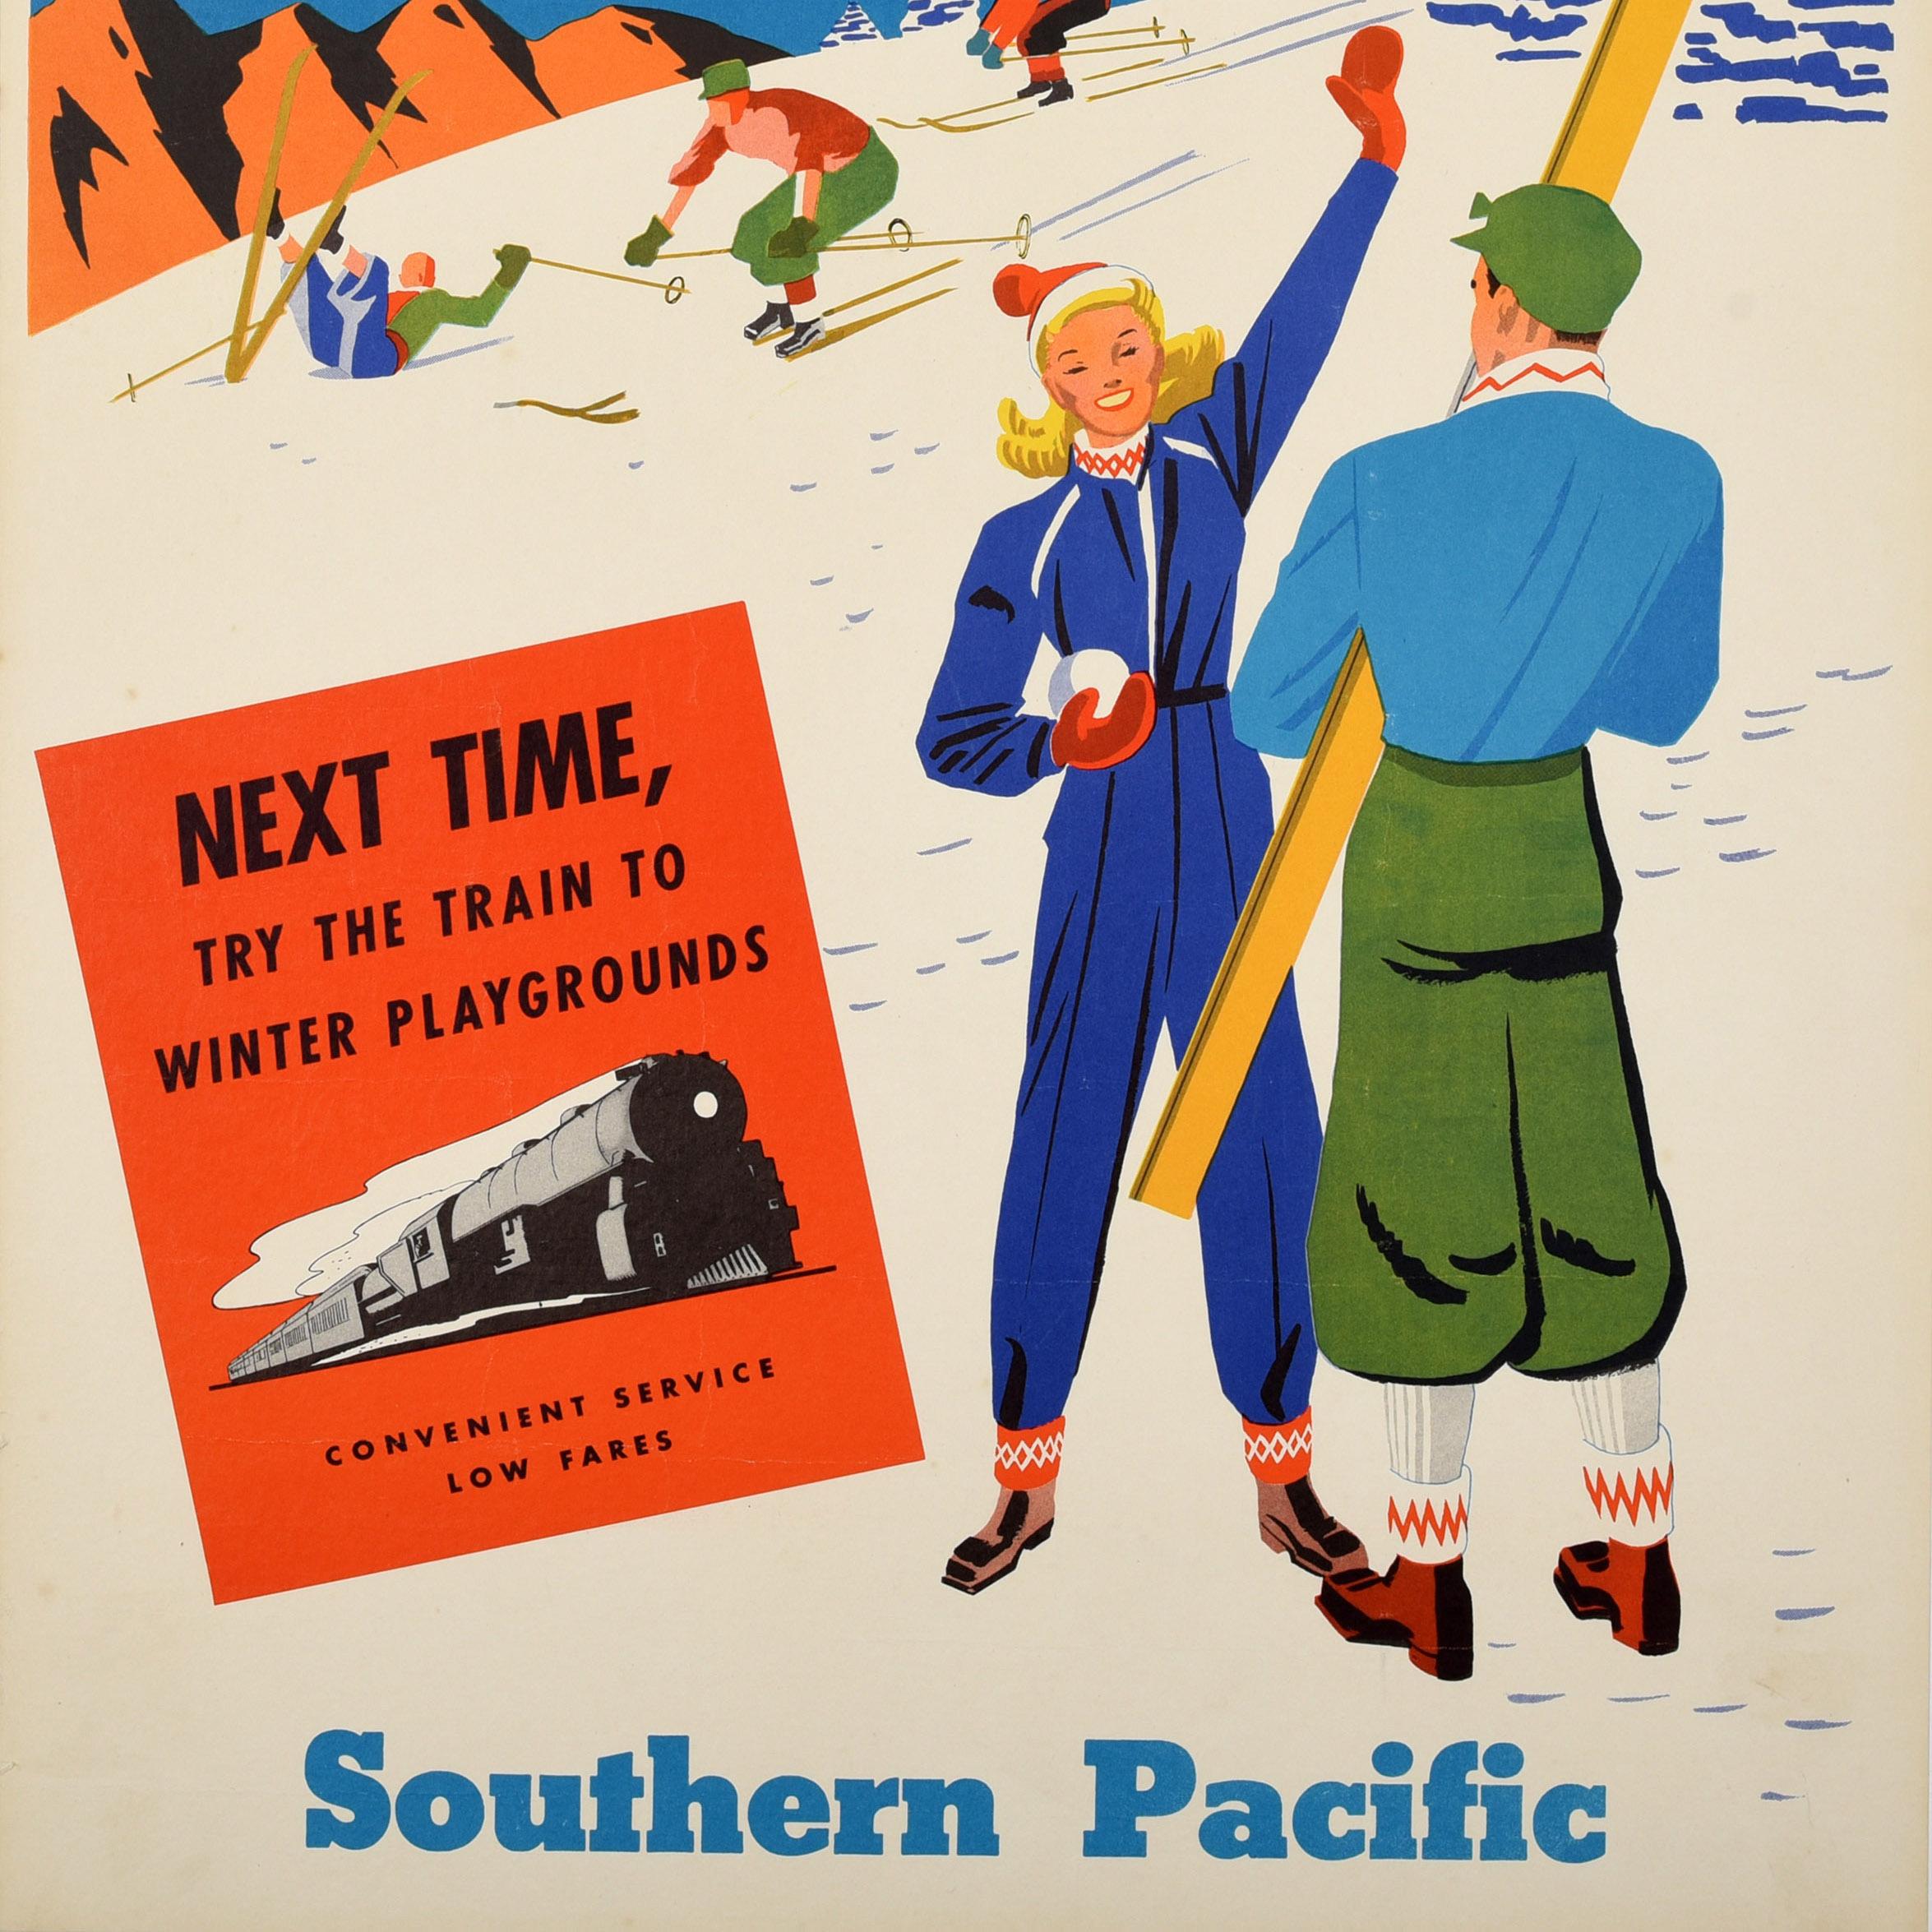 Original vintage ski and winter sport travel poster issued by Southern Pacific - Play in the Snow - featuring a fun and colourful design depicting a smiling lady holding a snowball and waving to the viewer next to a man holding a pair of skis in